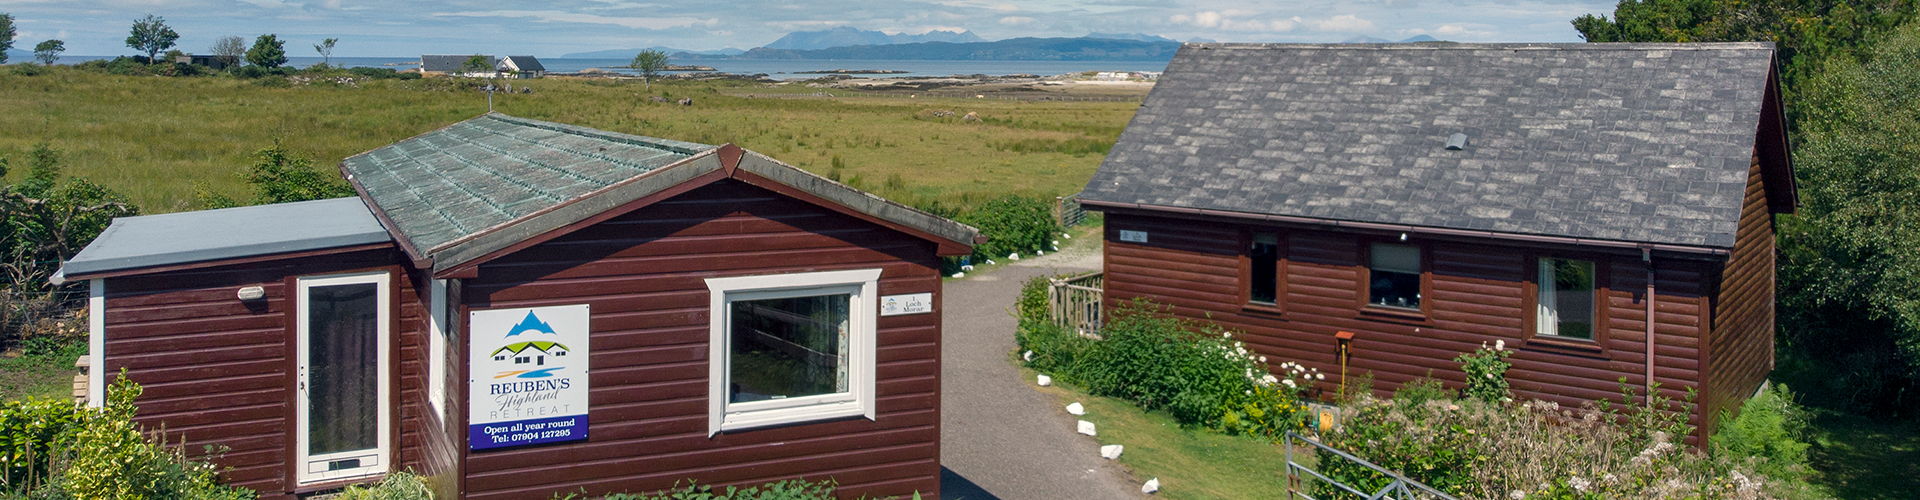 Entrance to Reuben's Highland Retreat with the Isle of Skye in the background